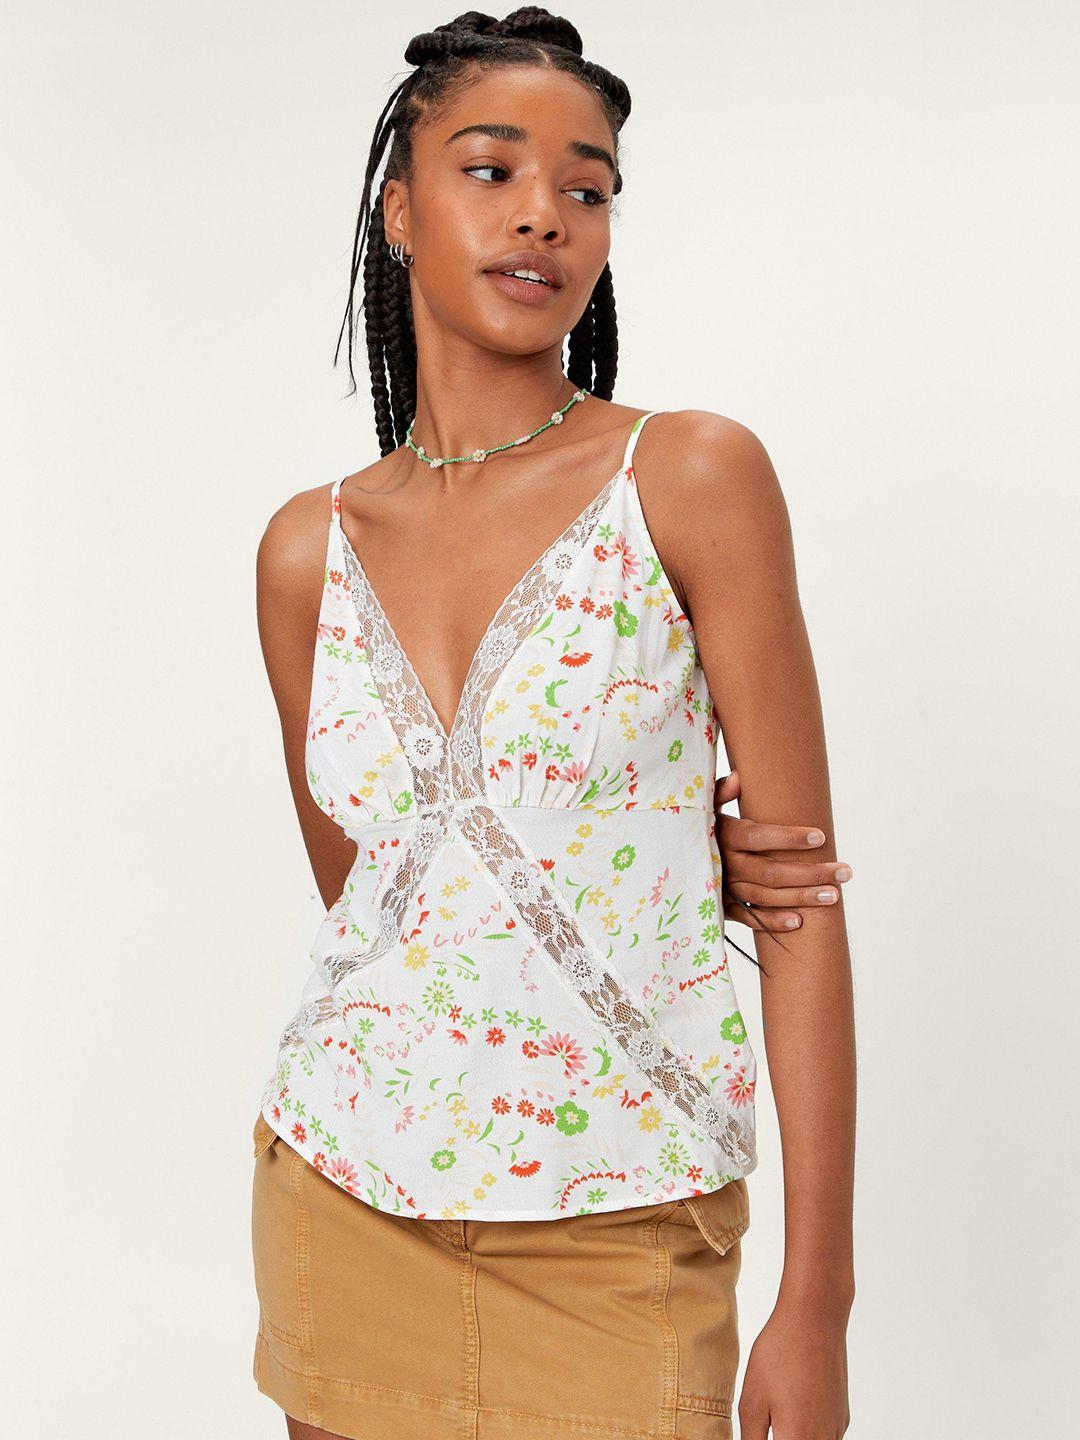 nasty gal white & green floral print lace insert cami top